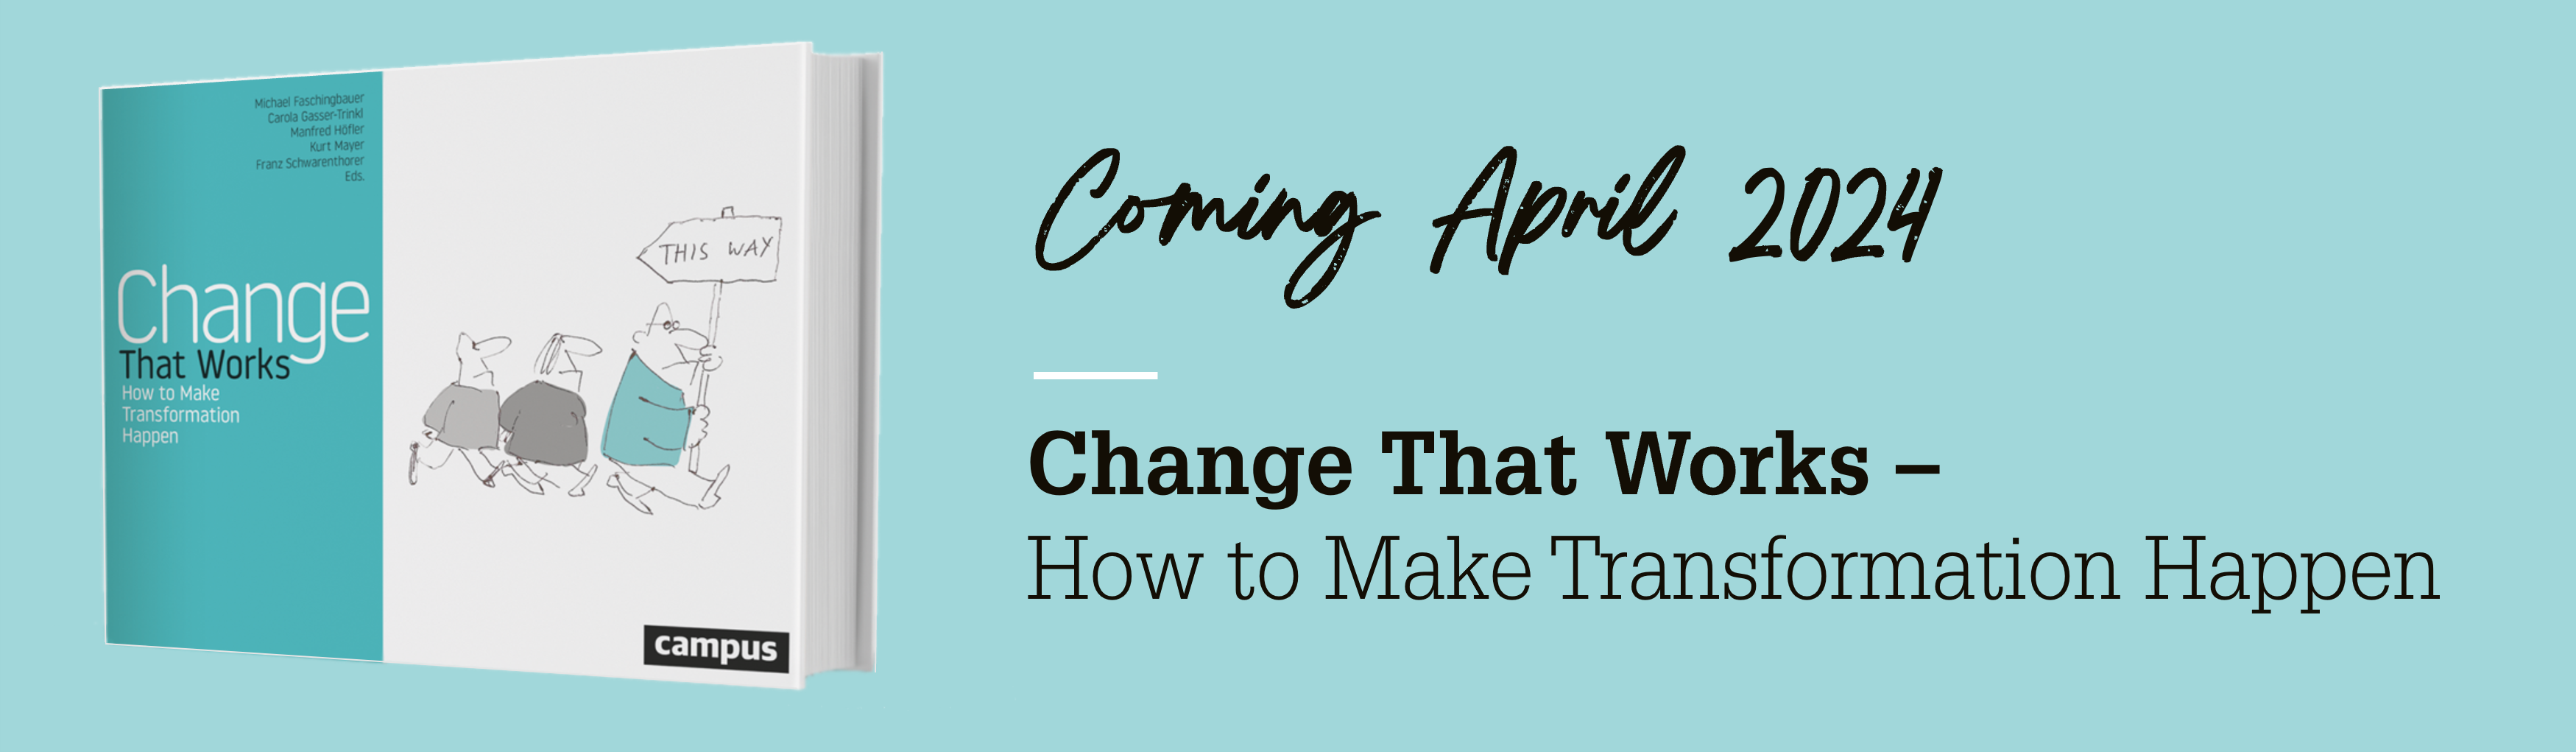 Mockup book and Change That Works, coming April 2024